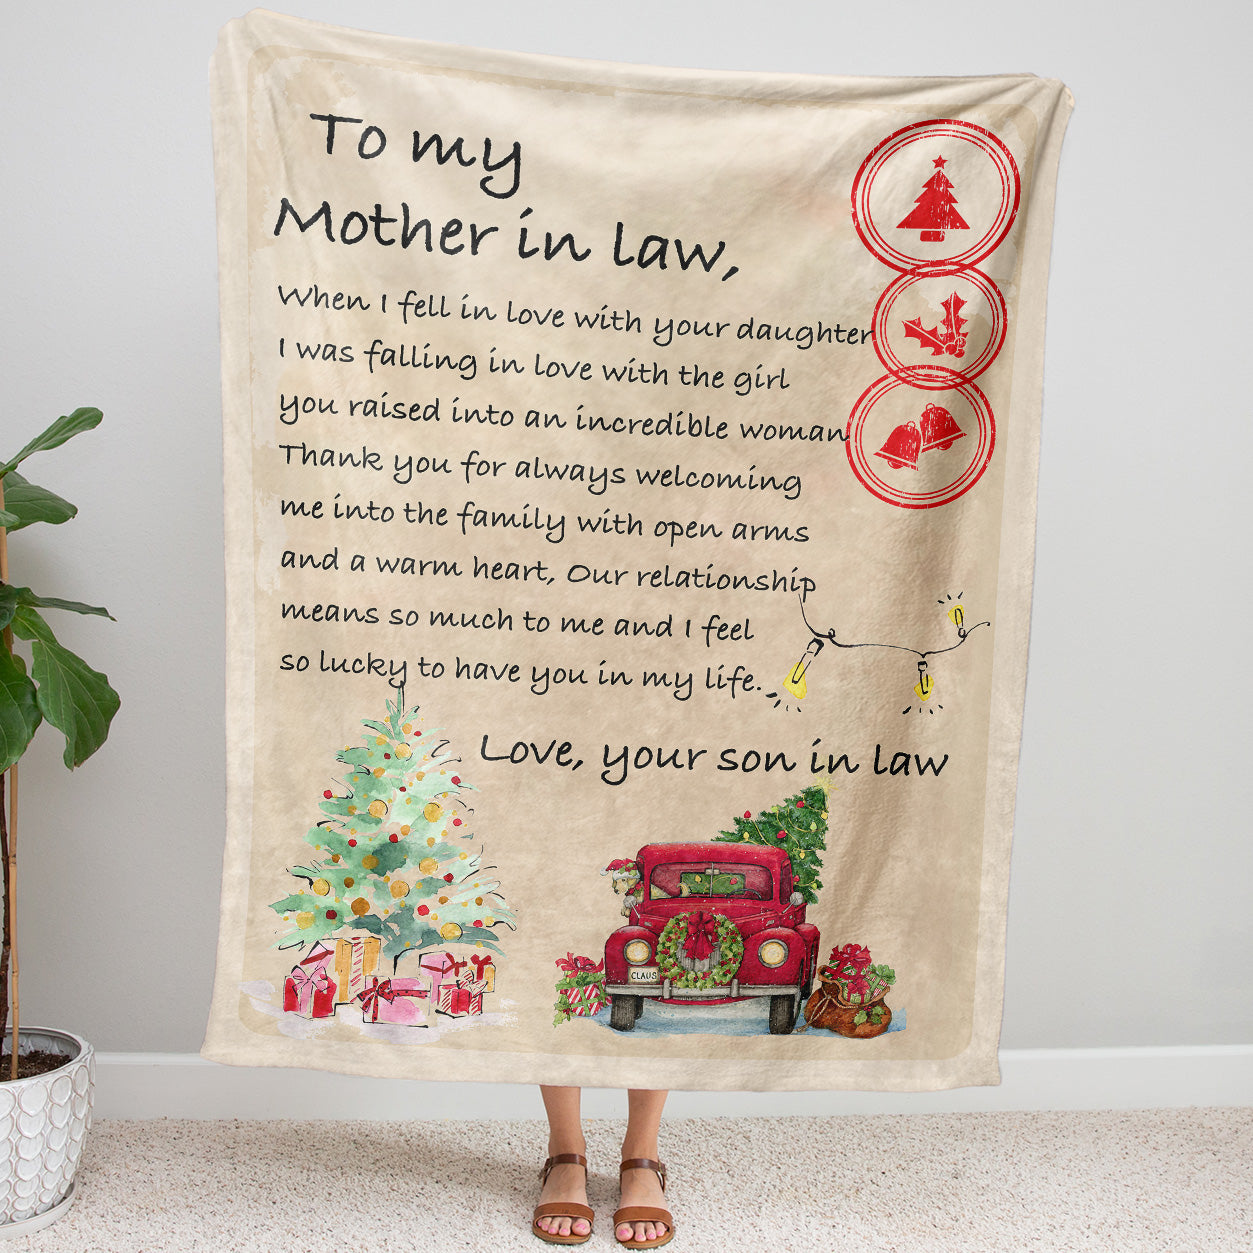 Christmas Gifts Inspiration : Mother in Law Christmas Gifts  In law  christmas gifts, Law christmas, Mother christmas gifts